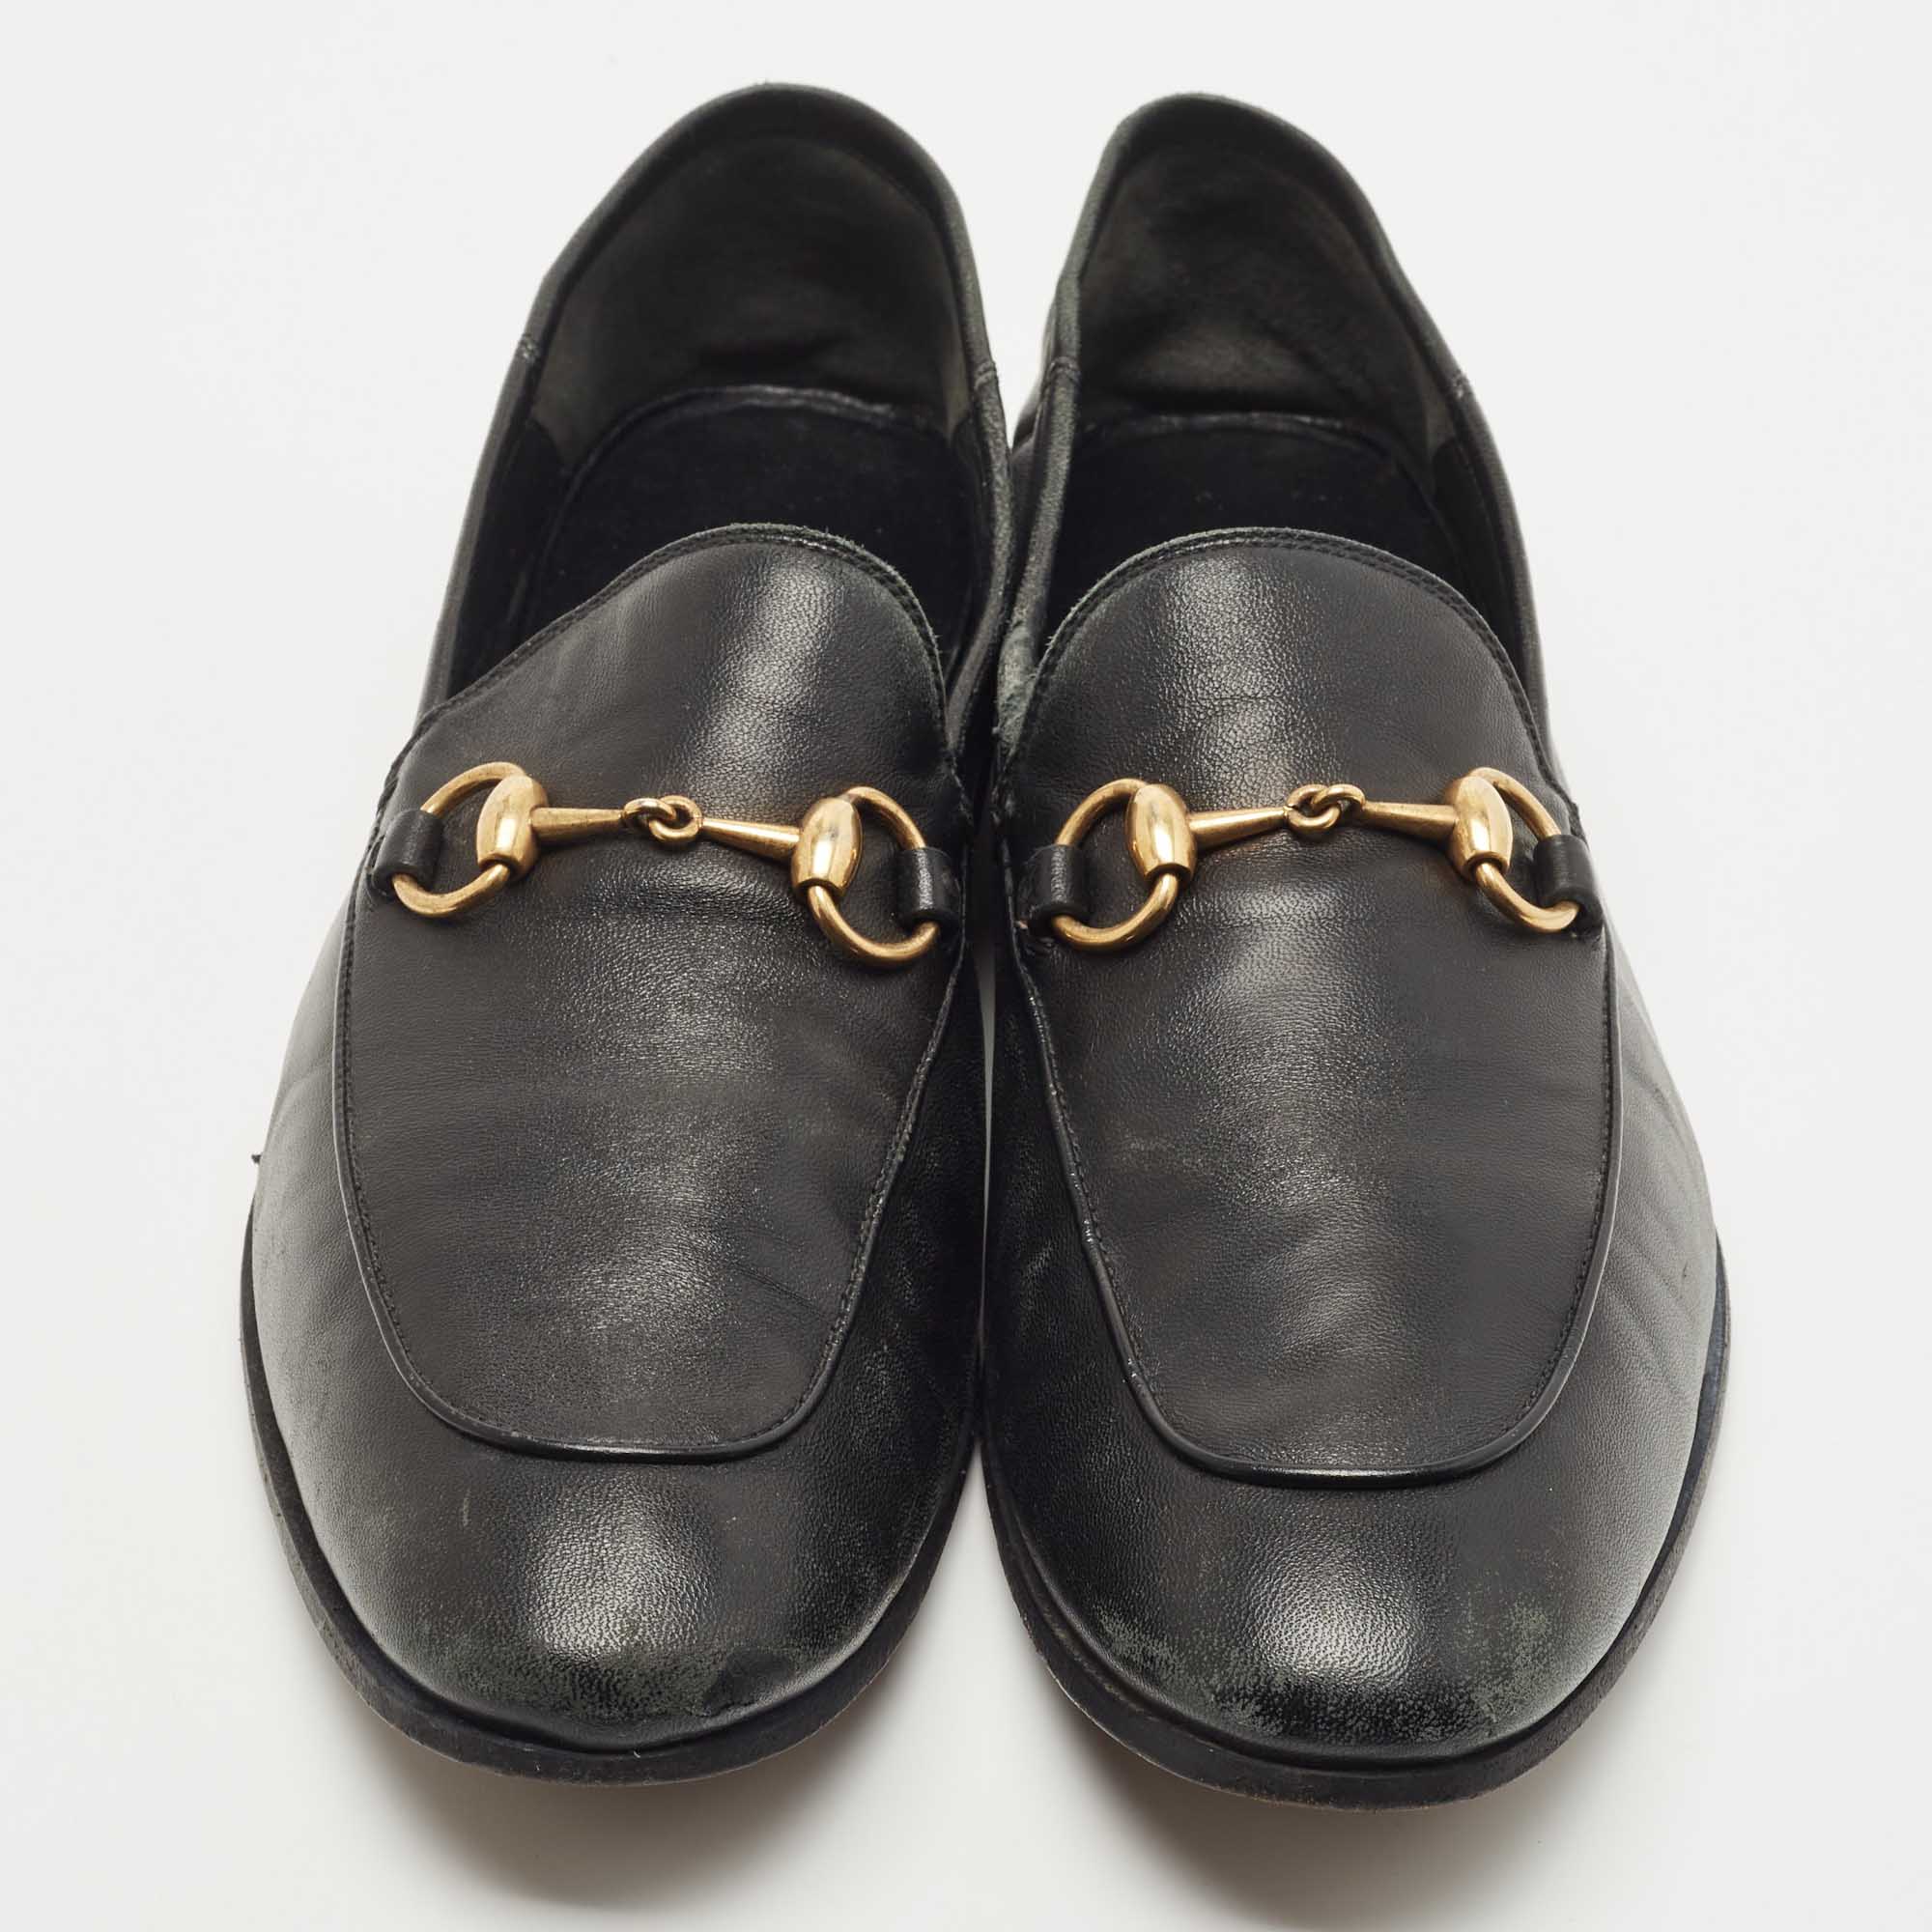 Gucci Black Leather Jordaan Loafers Size 42